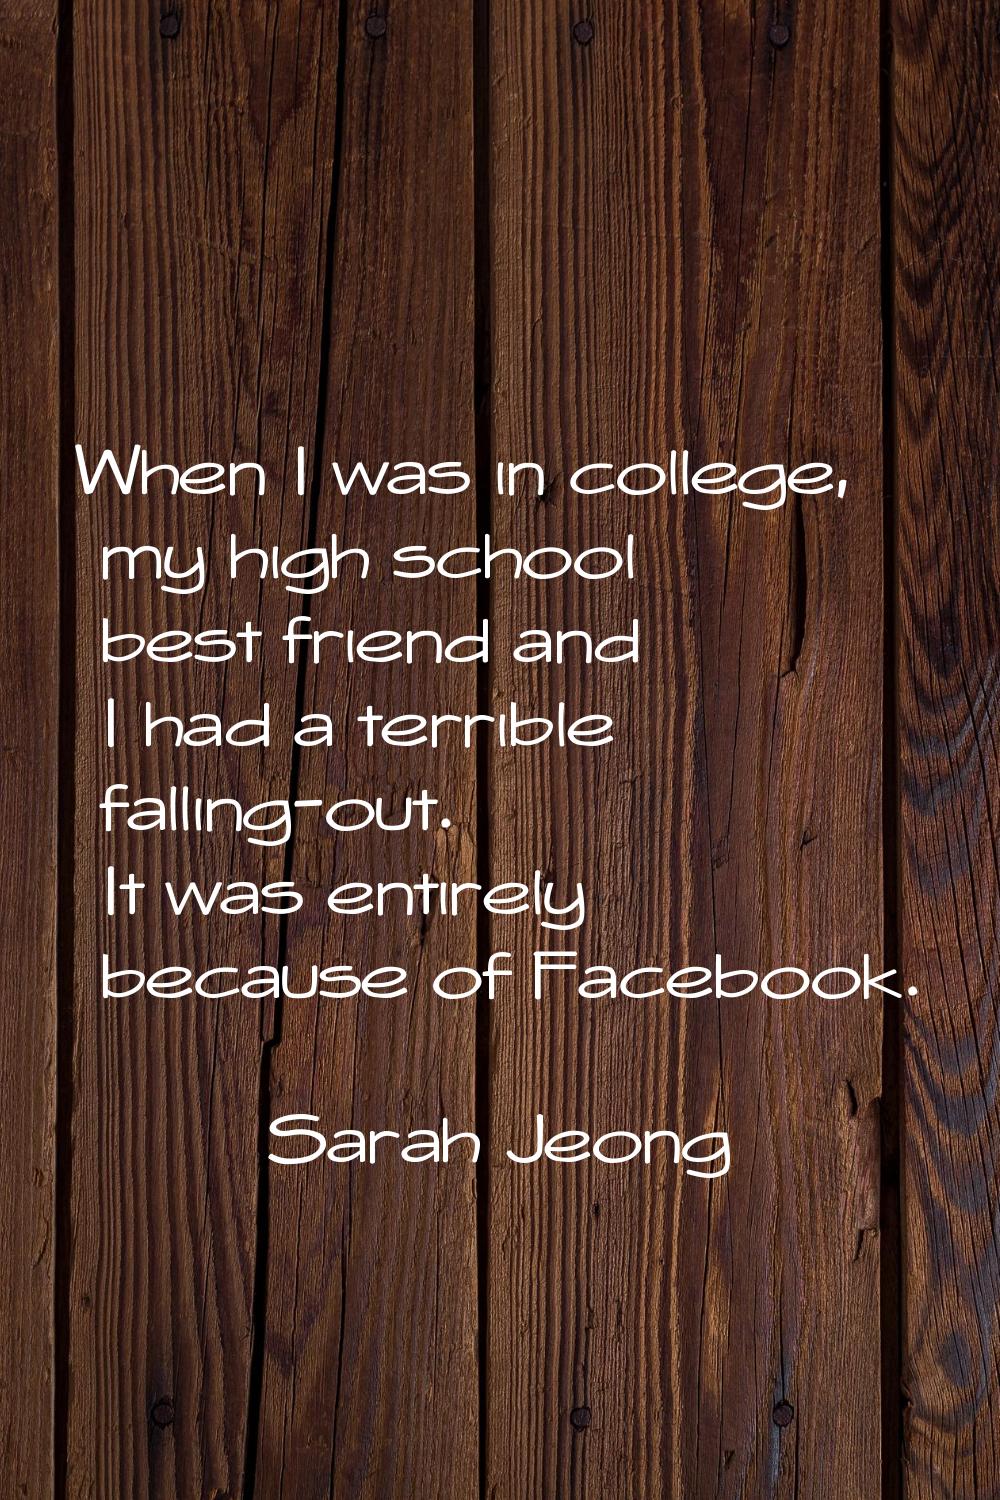 When I was in college, my high school best friend and I had a terrible falling-out. It was entirely